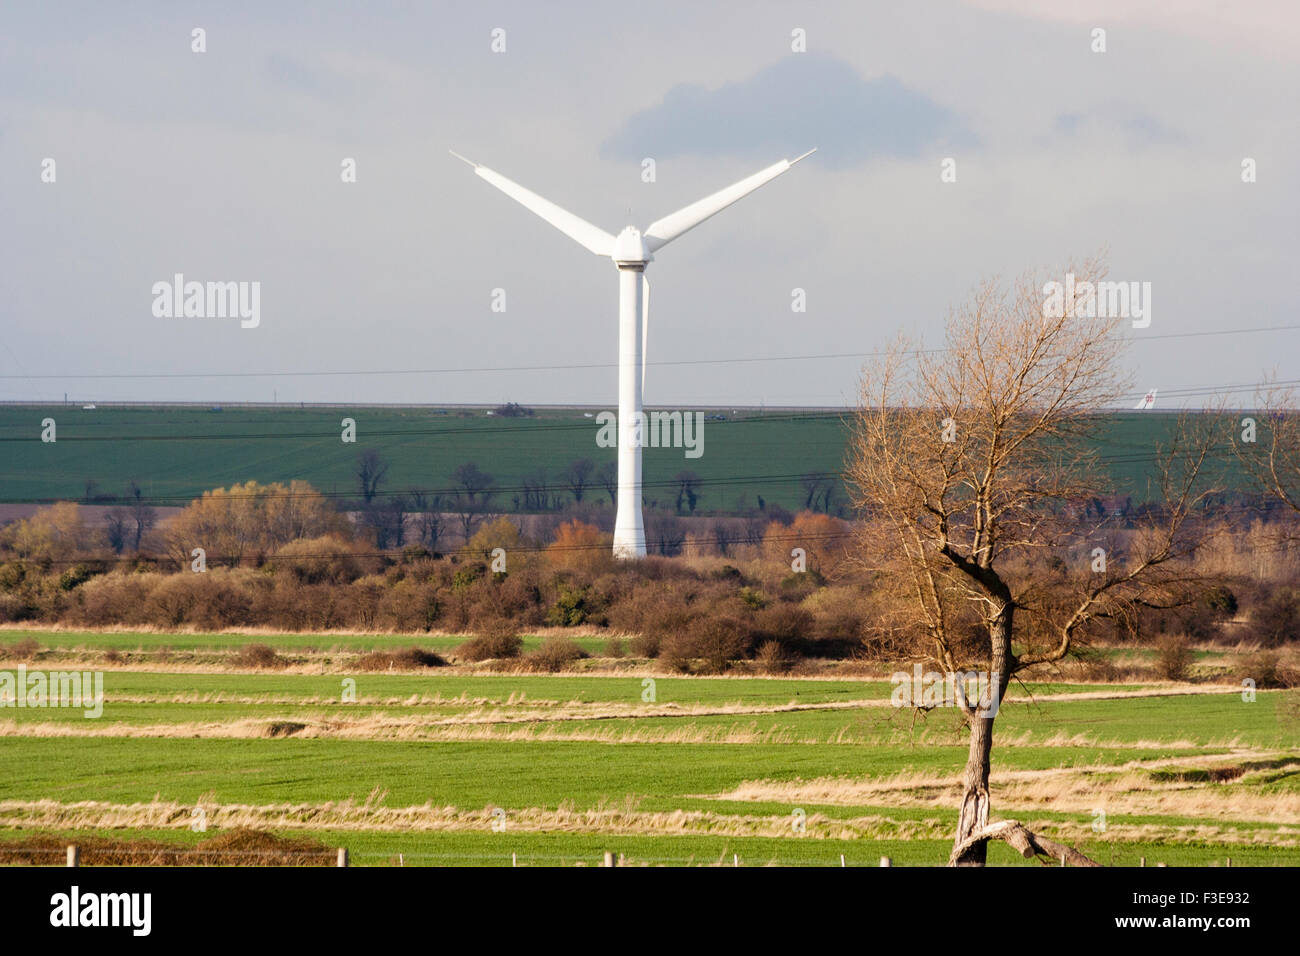 England, Ramsgate. Single wind-turbine seen from the distance, sunlit landscape in foreground, but dark behind, road on the horizon. Stock Photo